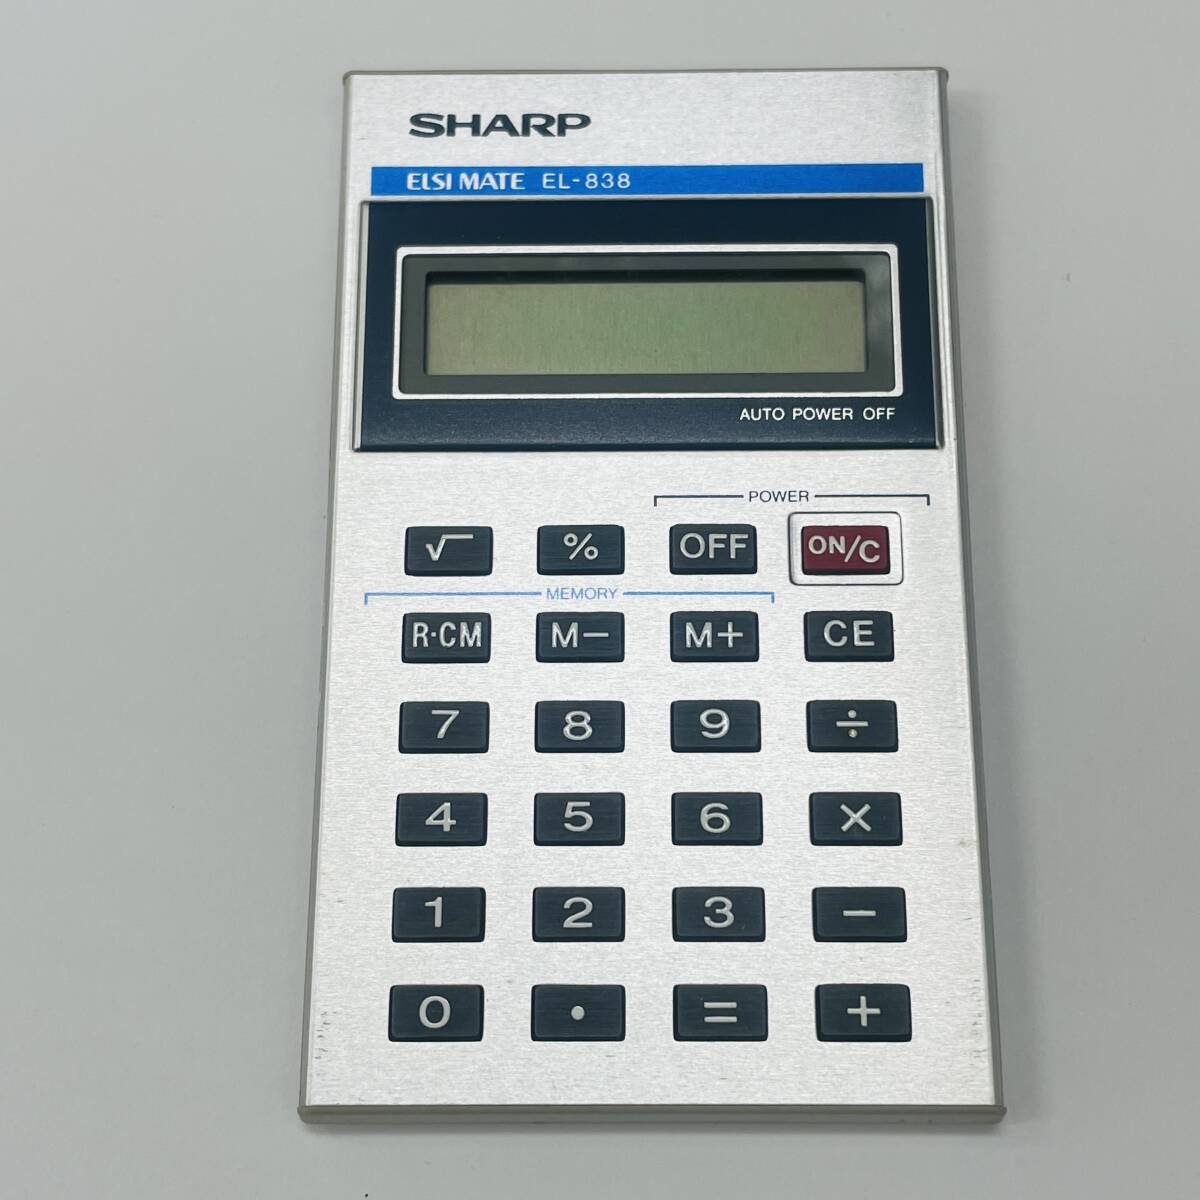 *[SHARP/ sharp ] calculator ELSI MATE EL-838 flat battery operation not yet verification goods with cover count machine *